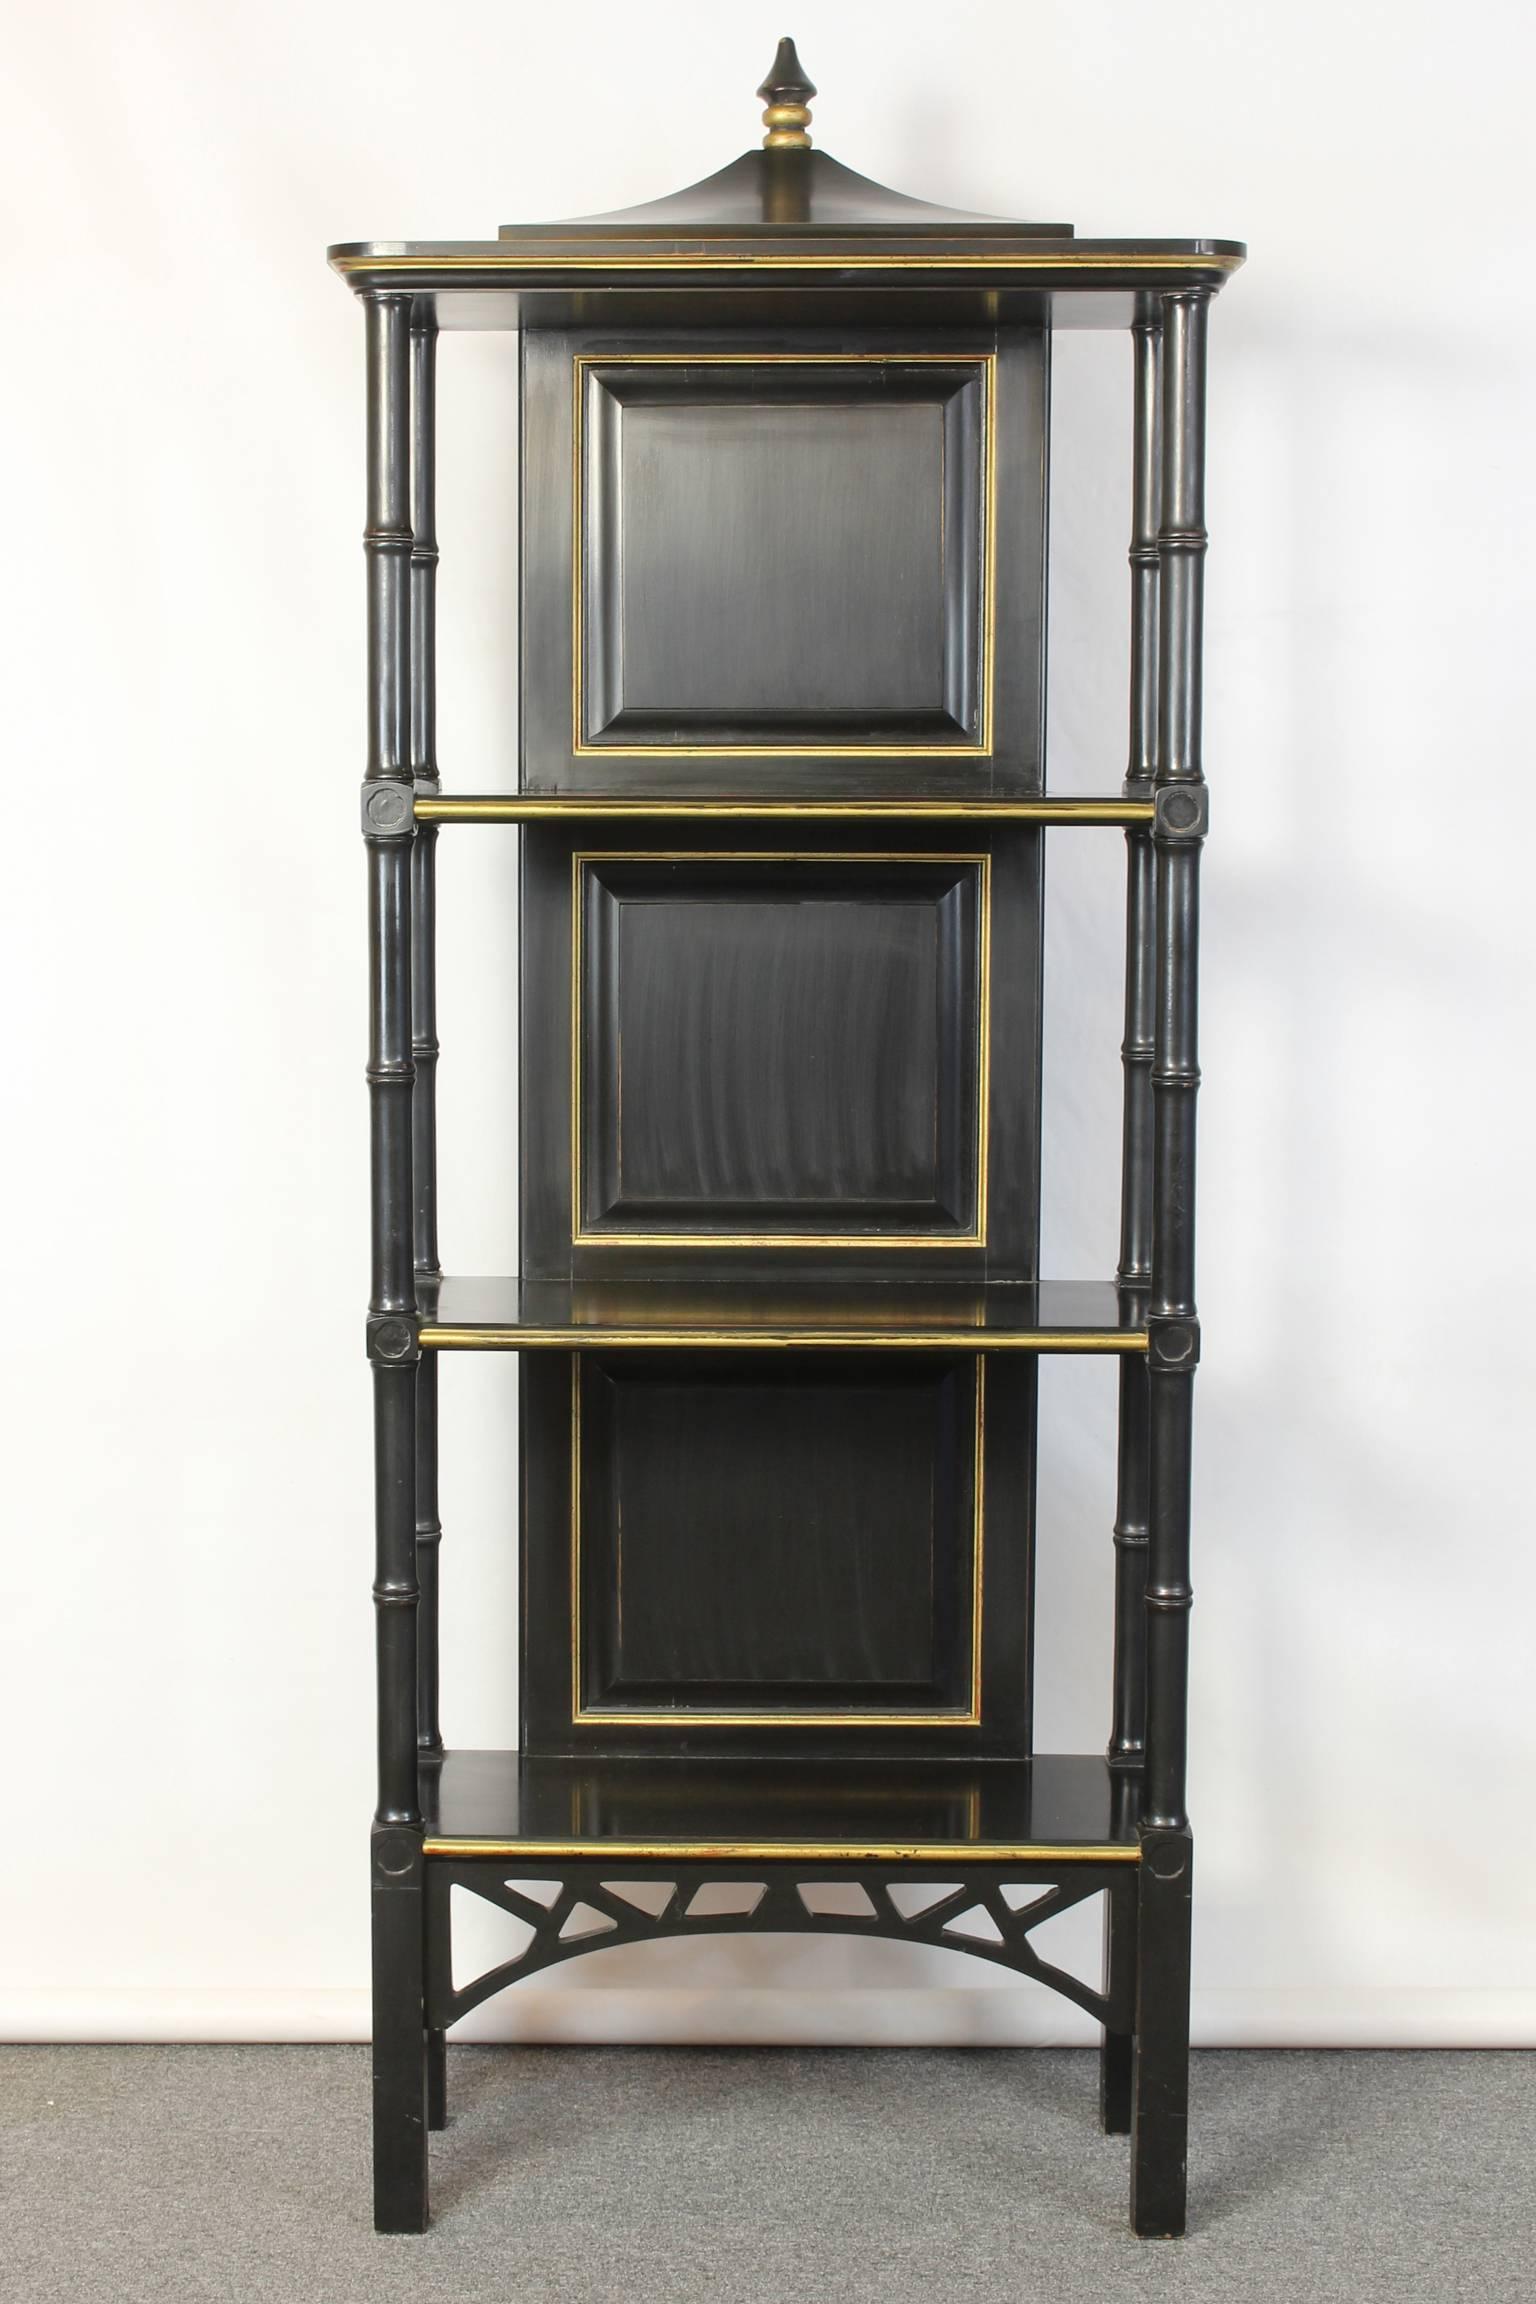 A charming chinoiserie inspired three shelf étagère in black and gold carved wood.